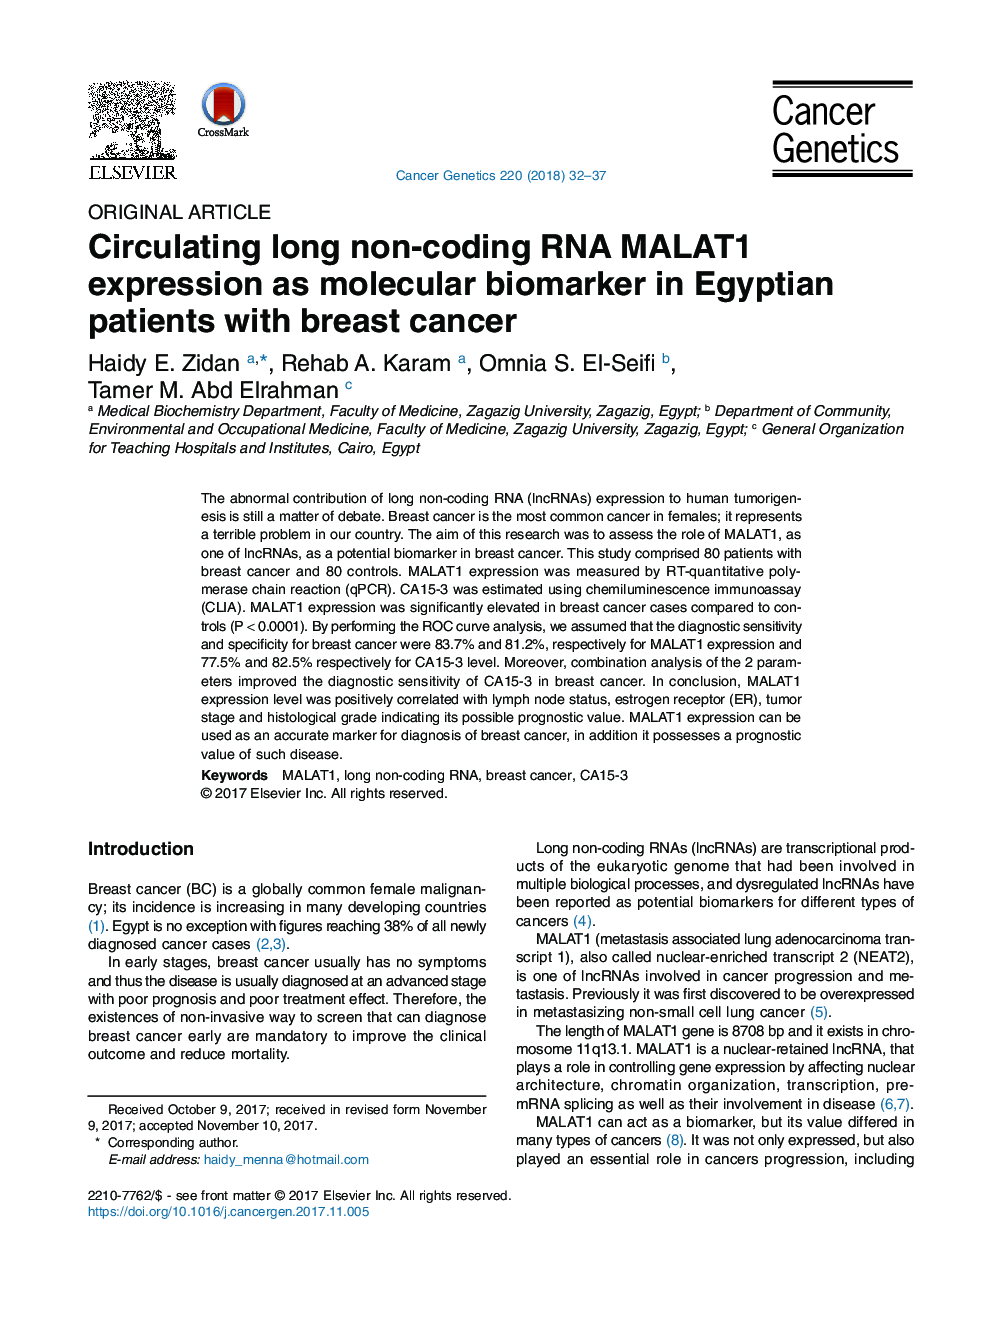 Circulating long non-coding RNA MALAT1 expression as molecular biomarker in Egyptian patients with breast cancer